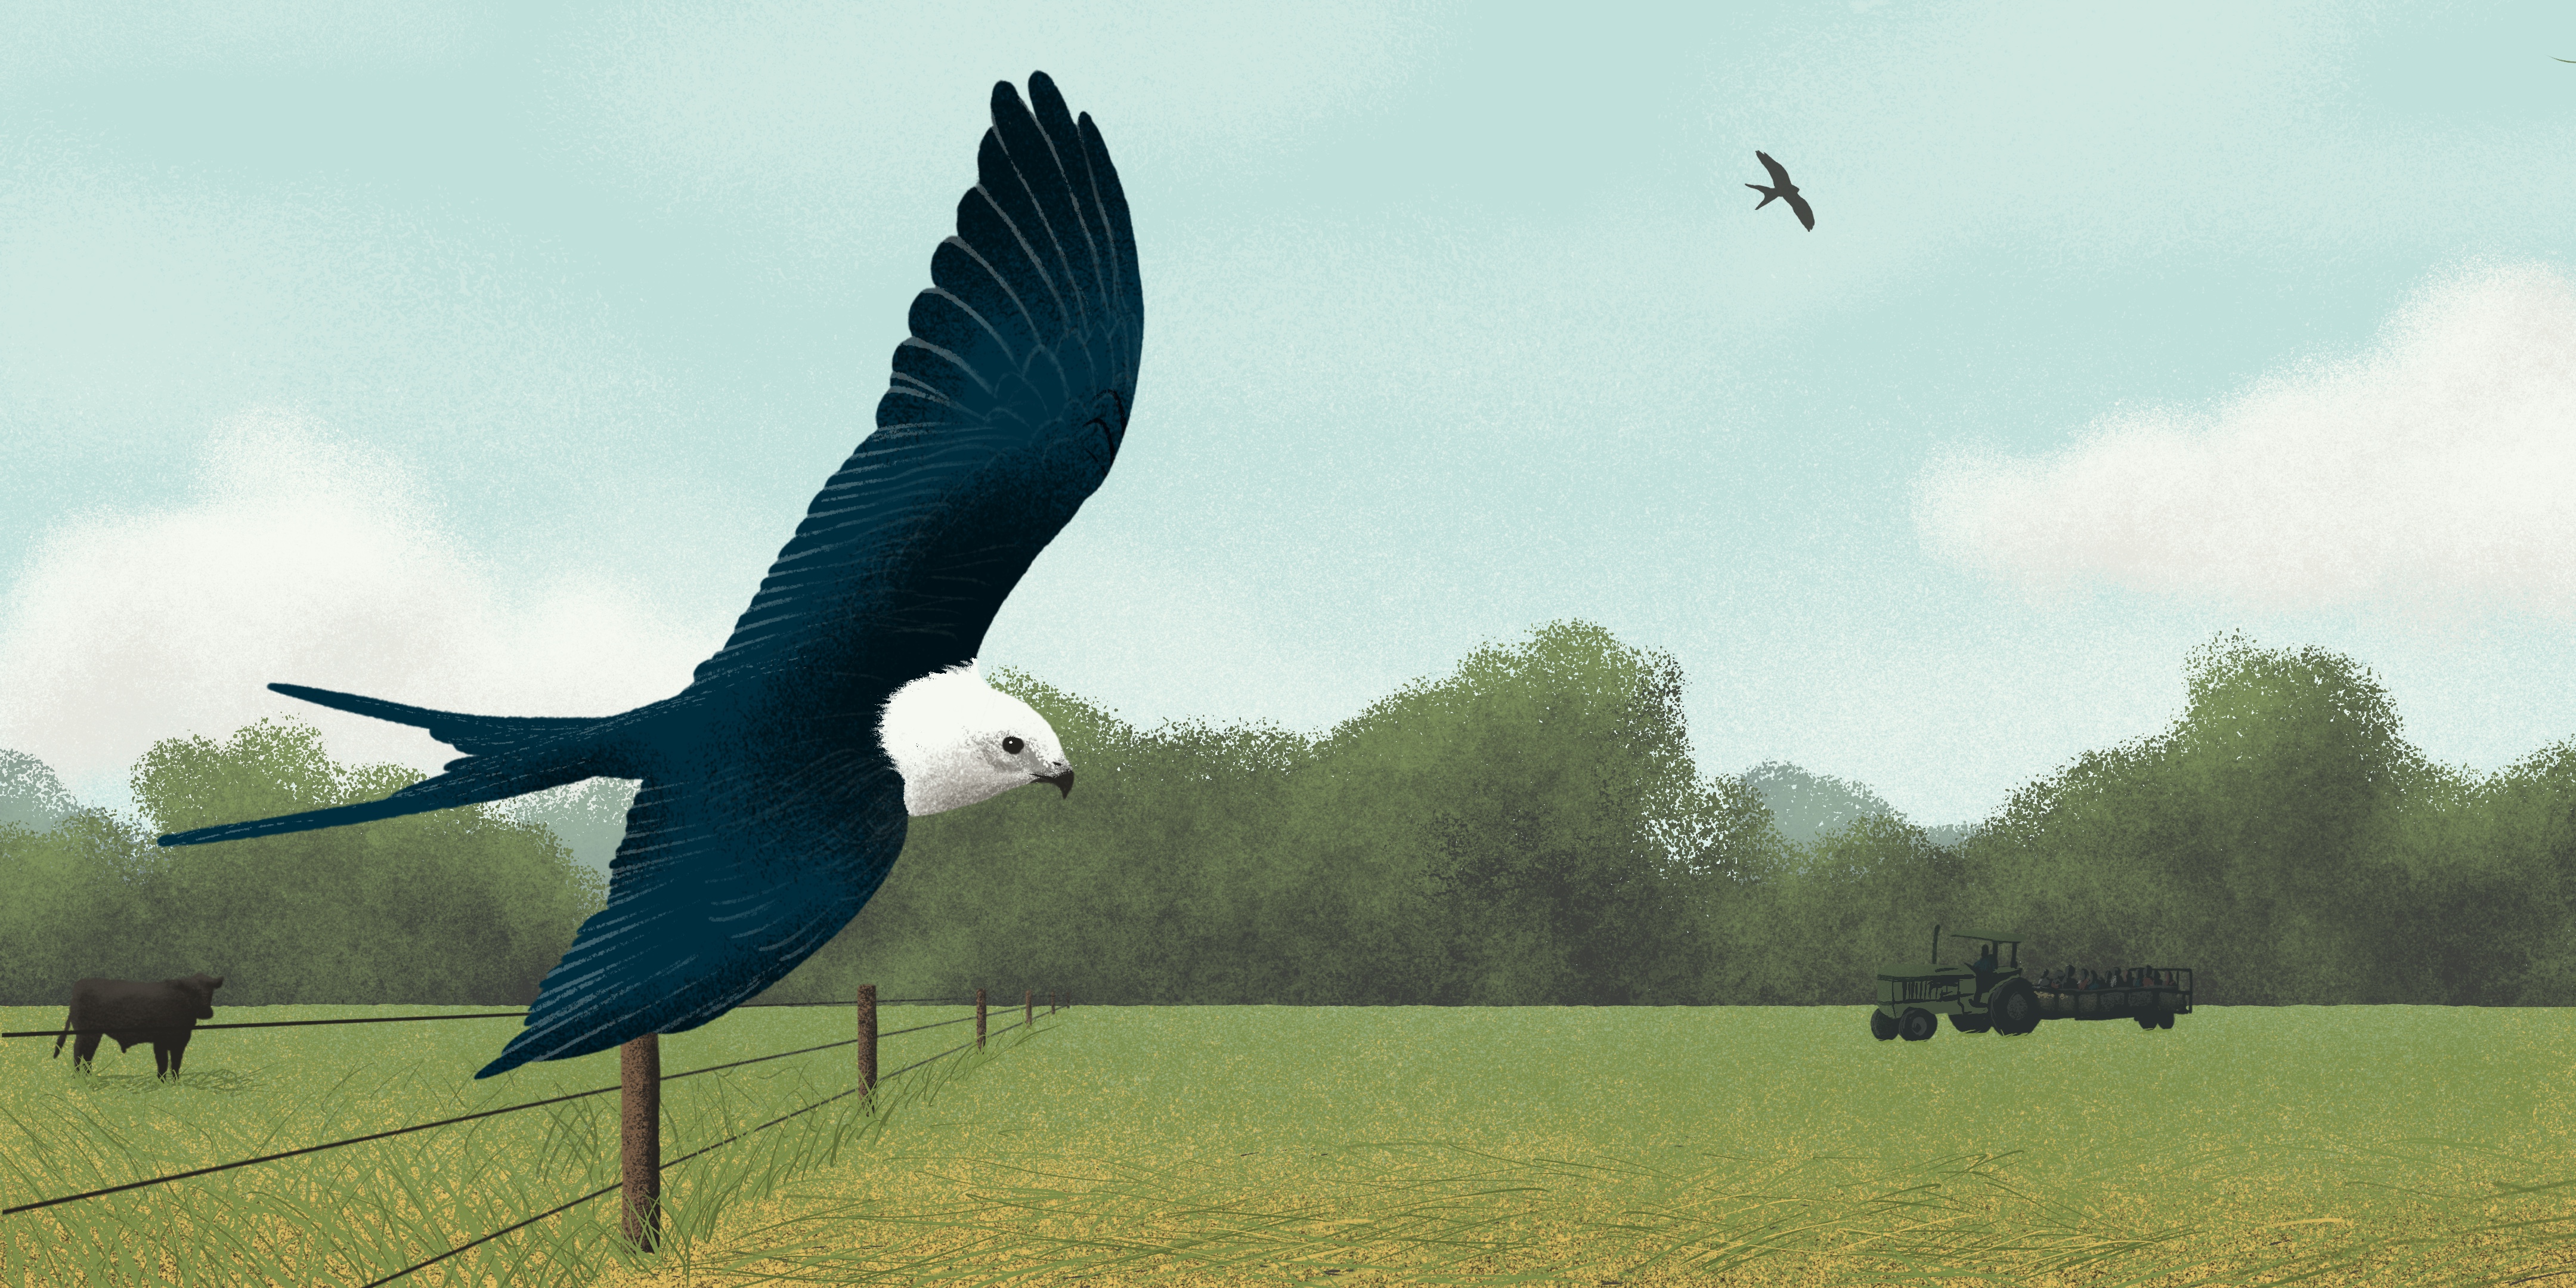 An illustration of a Swallow-tailed Kite flying close to the ground, past a cow and a tractor in a rural landscape.